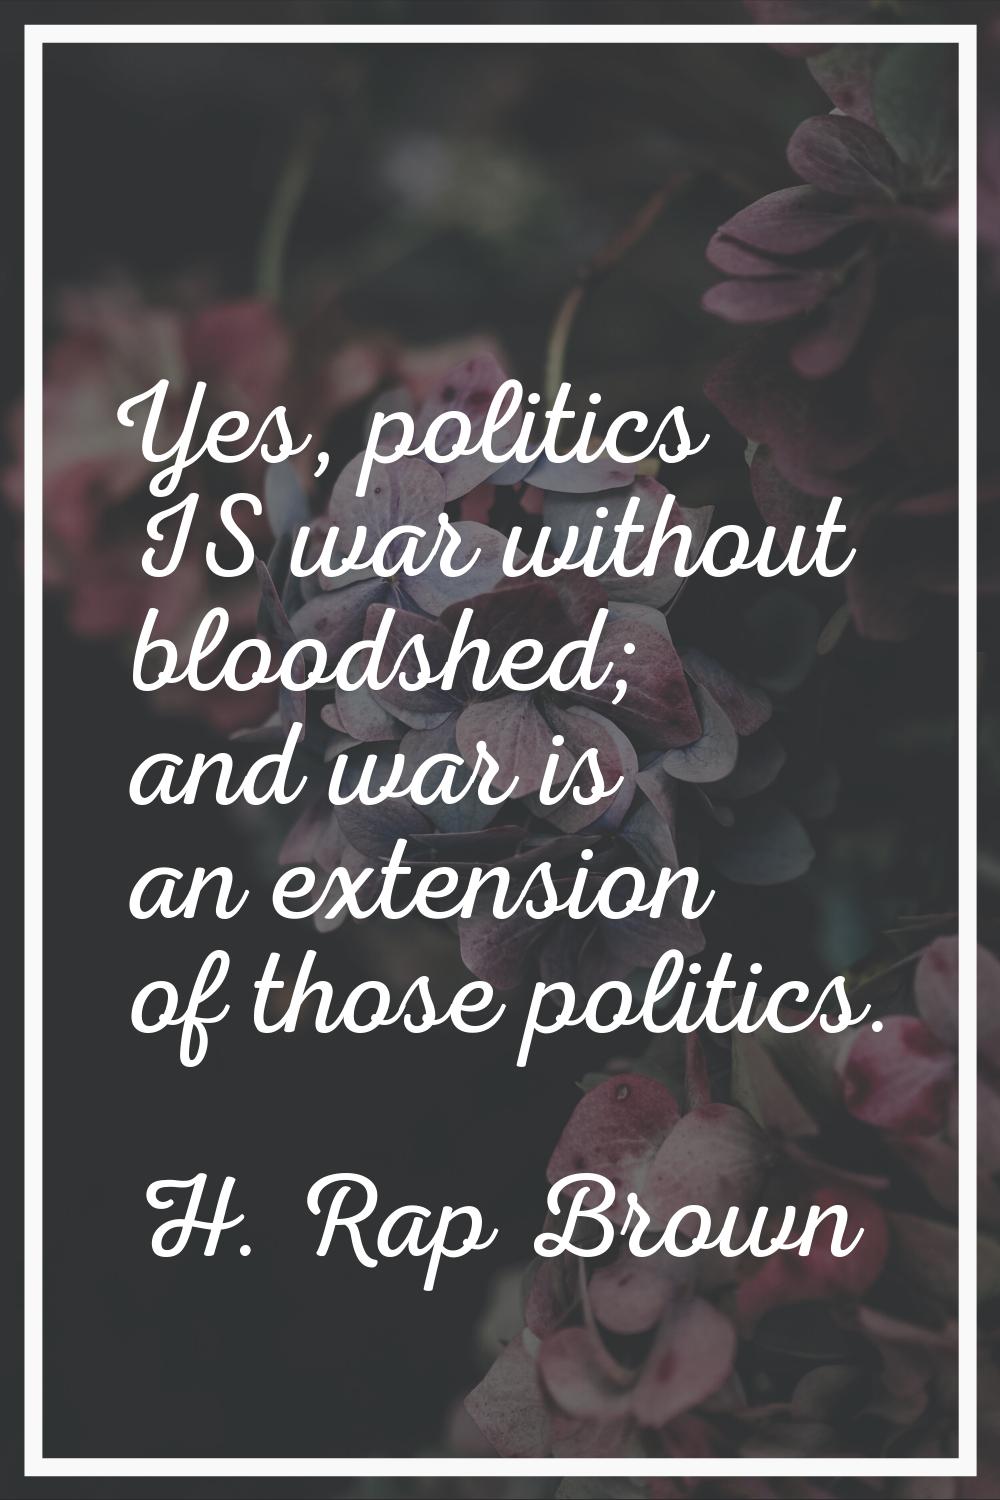 Yes, politics IS war without bloodshed; and war is an extension of those politics.